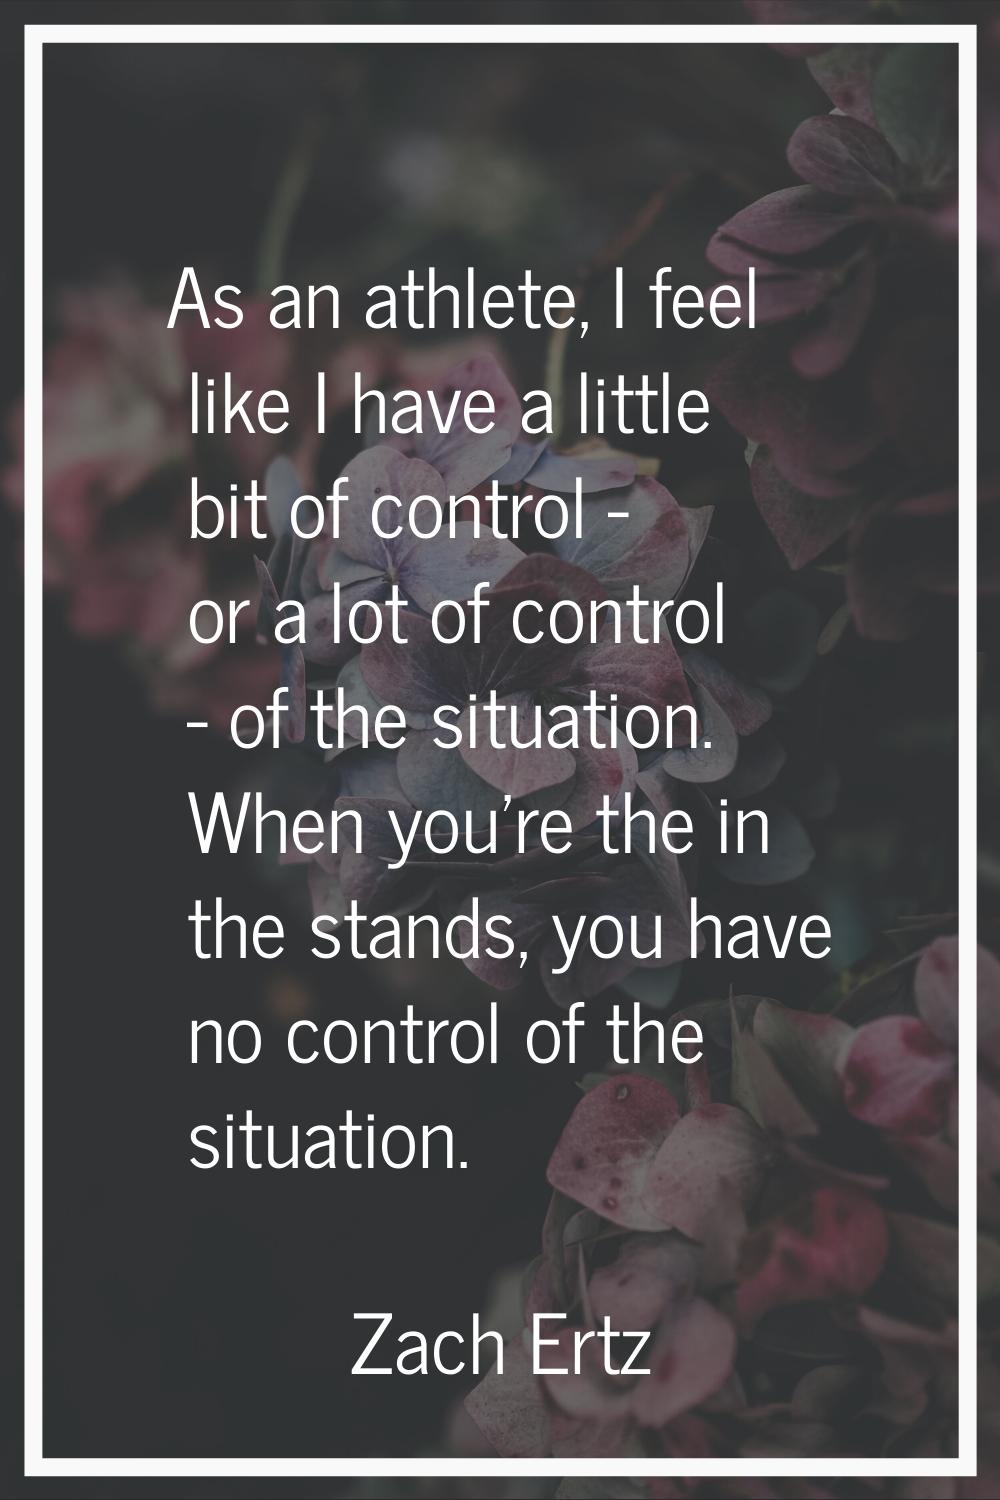 As an athlete, I feel like I have a little bit of control - or a lot of control - of the situation.